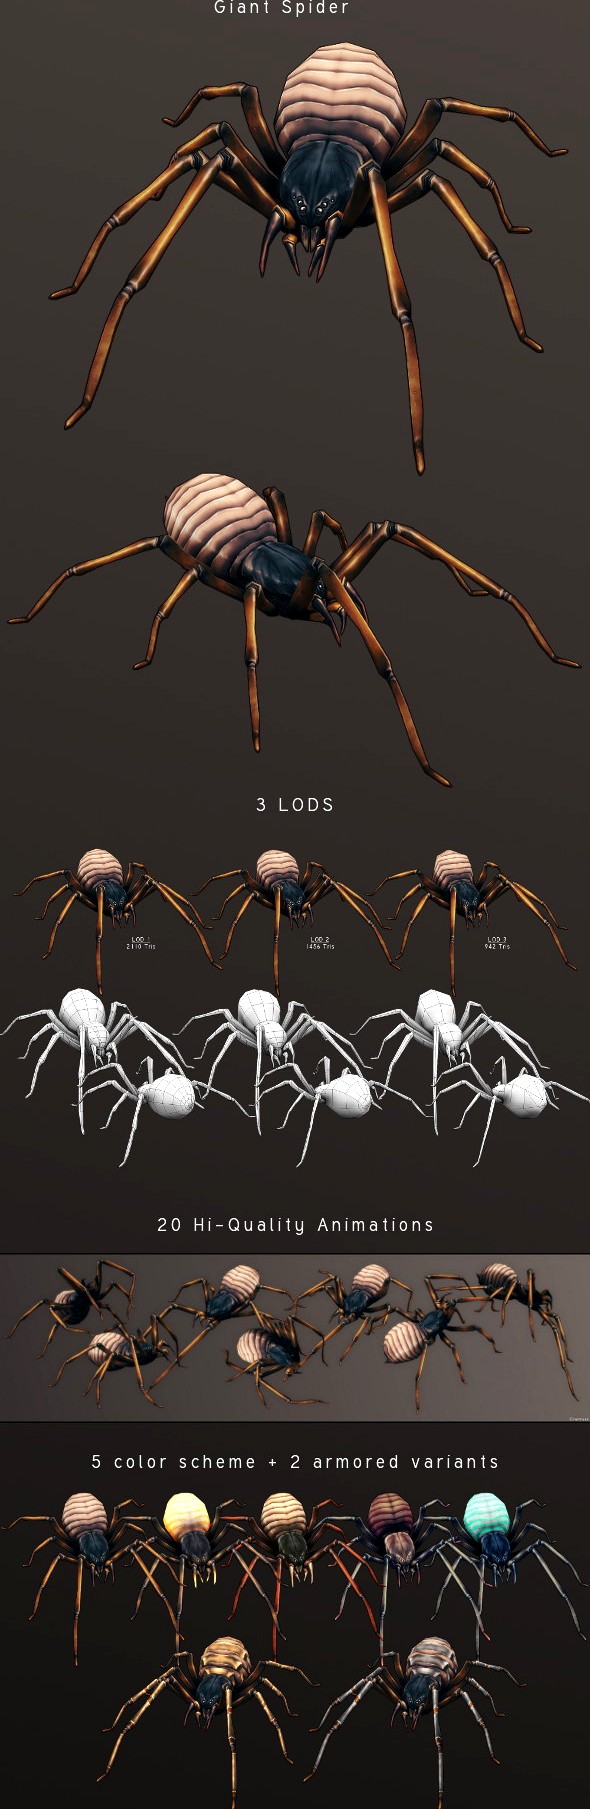 LowPoly HandPainted Giant Spider